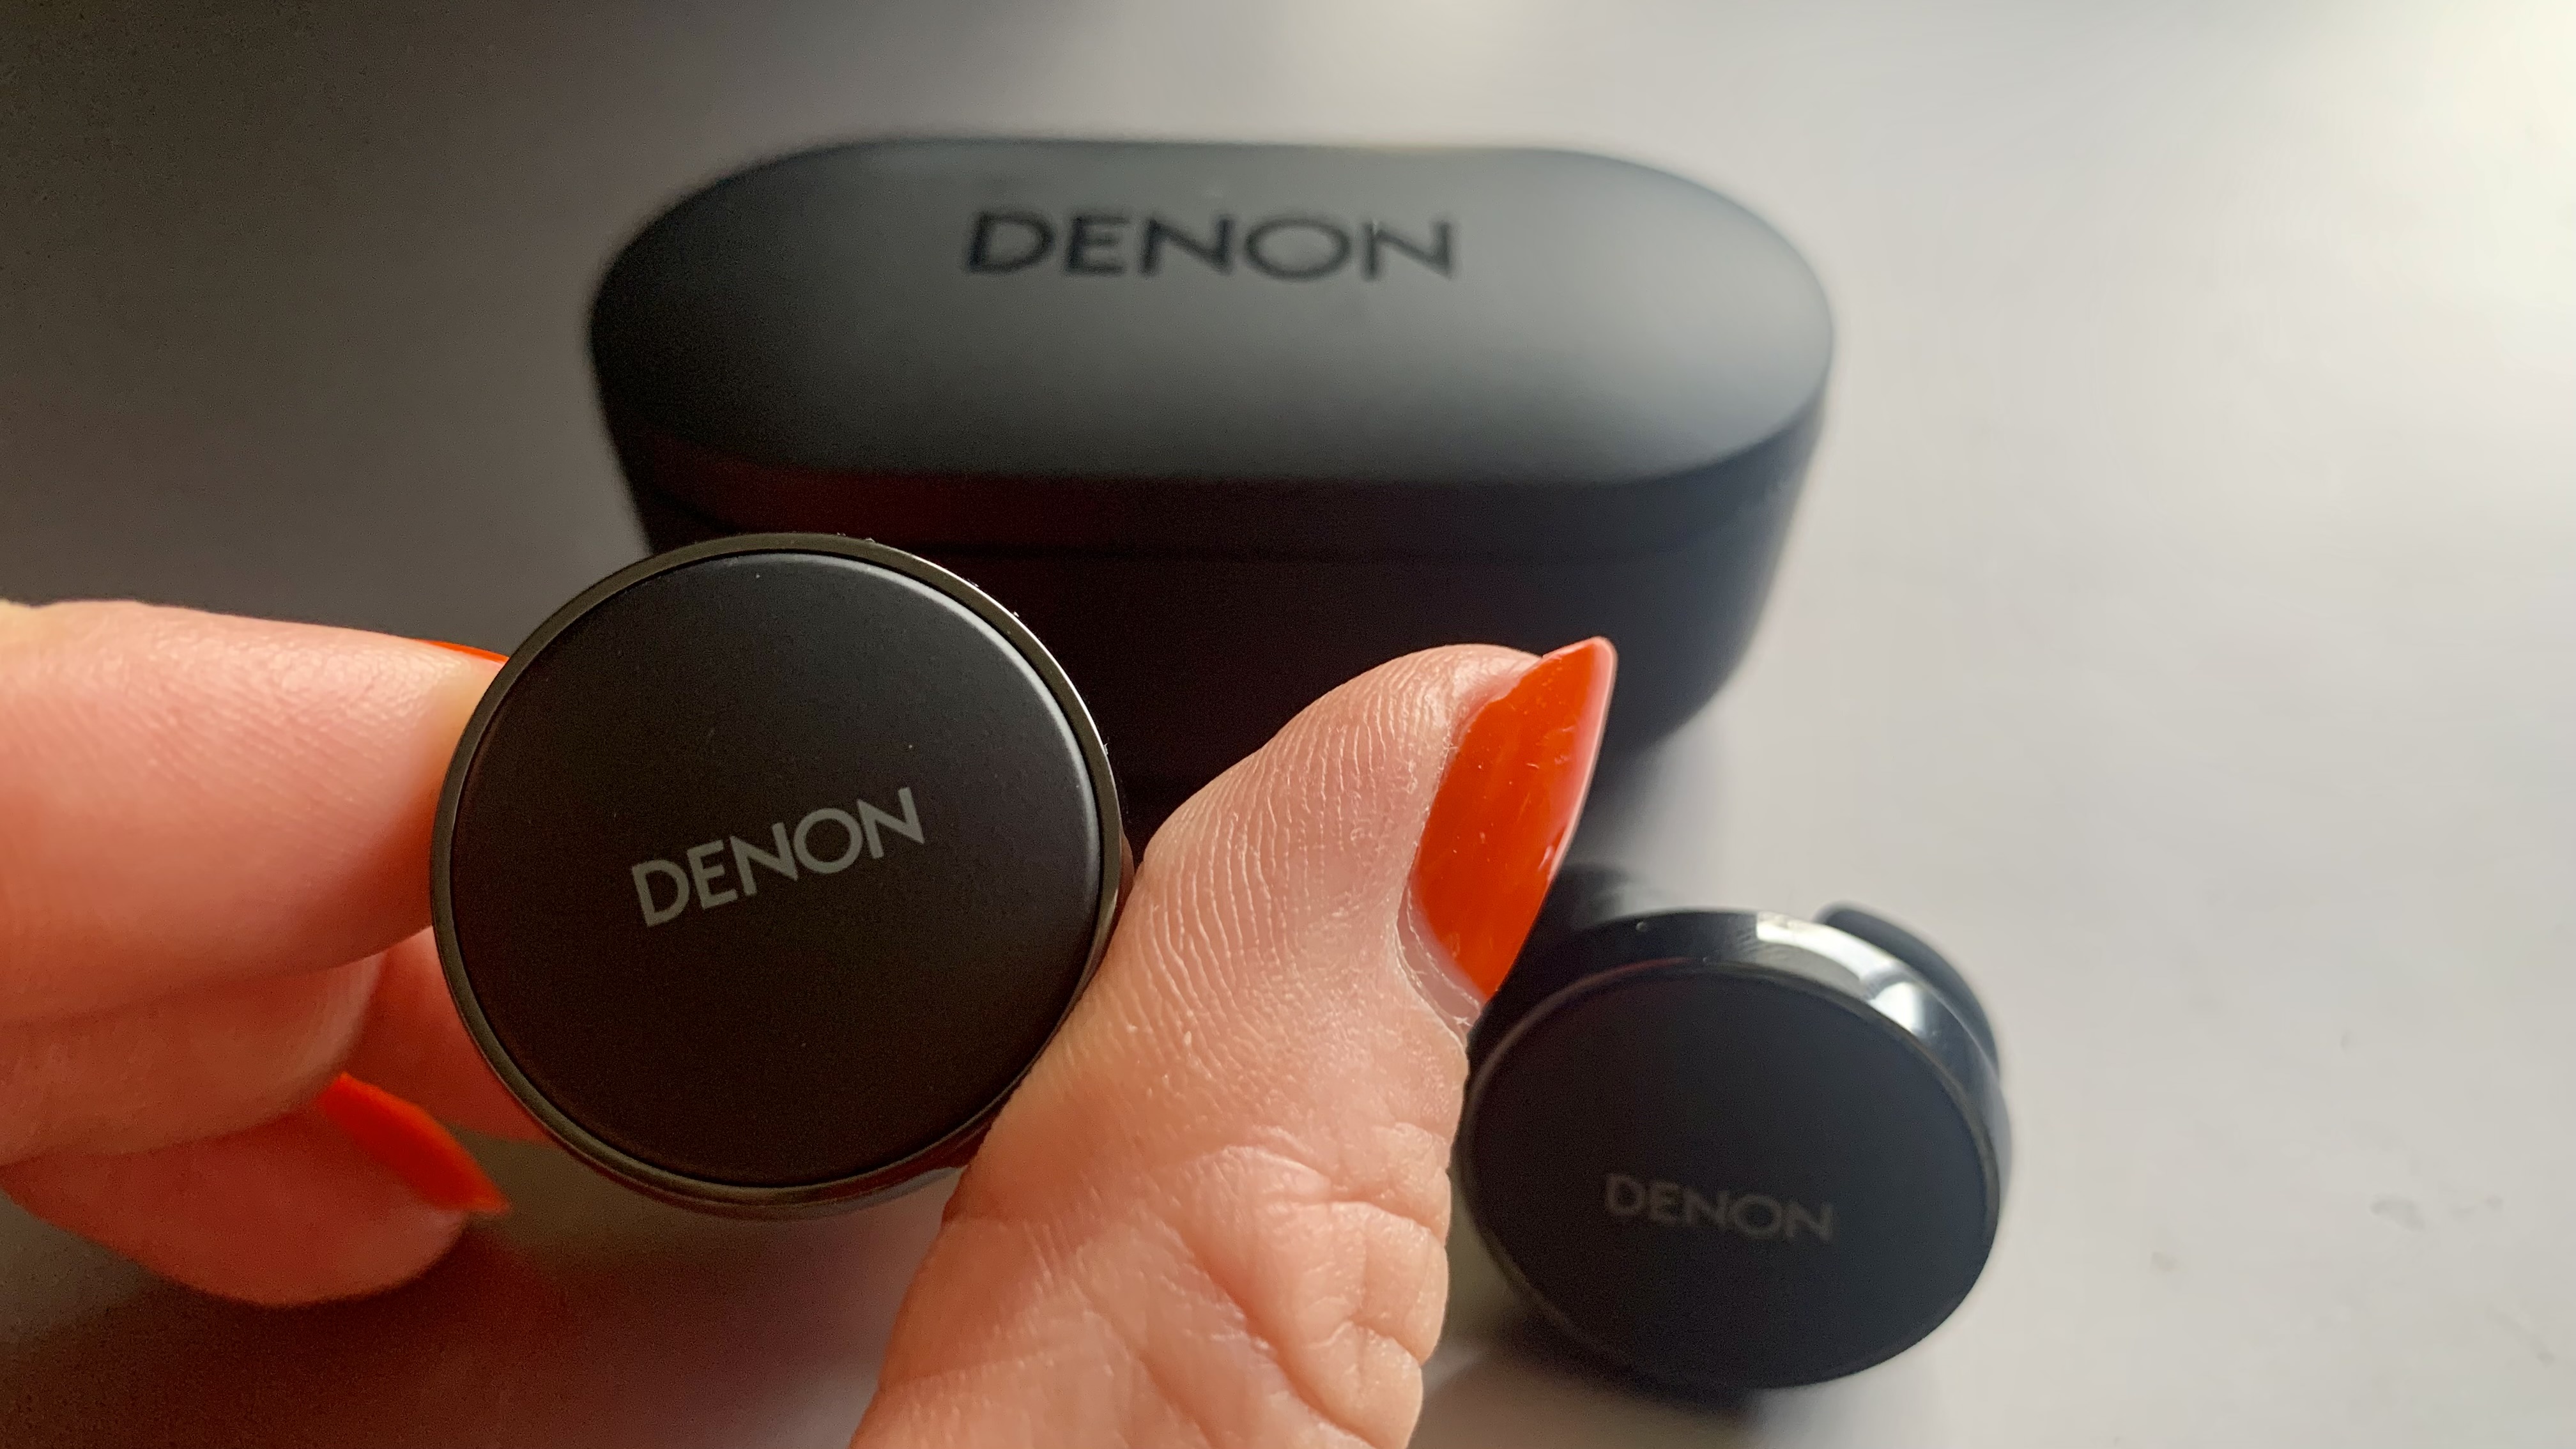 Denon PerL Pro earbuds held in a woman's hand, with the case behind.